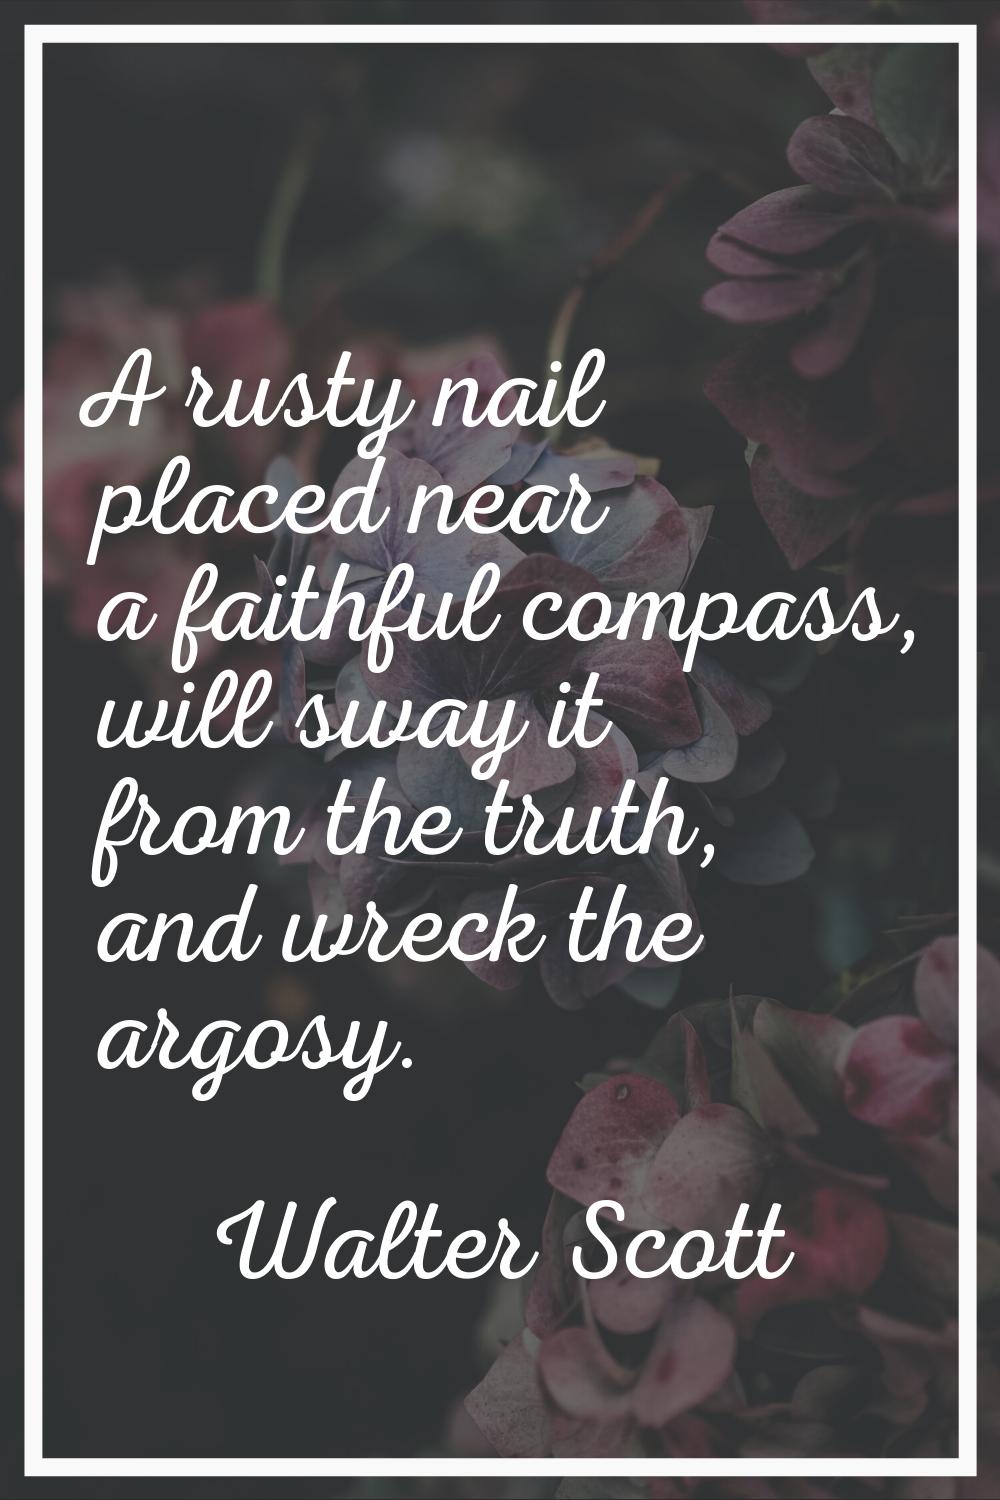 A rusty nail placed near a faithful compass, will sway it from the truth, and wreck the argosy.